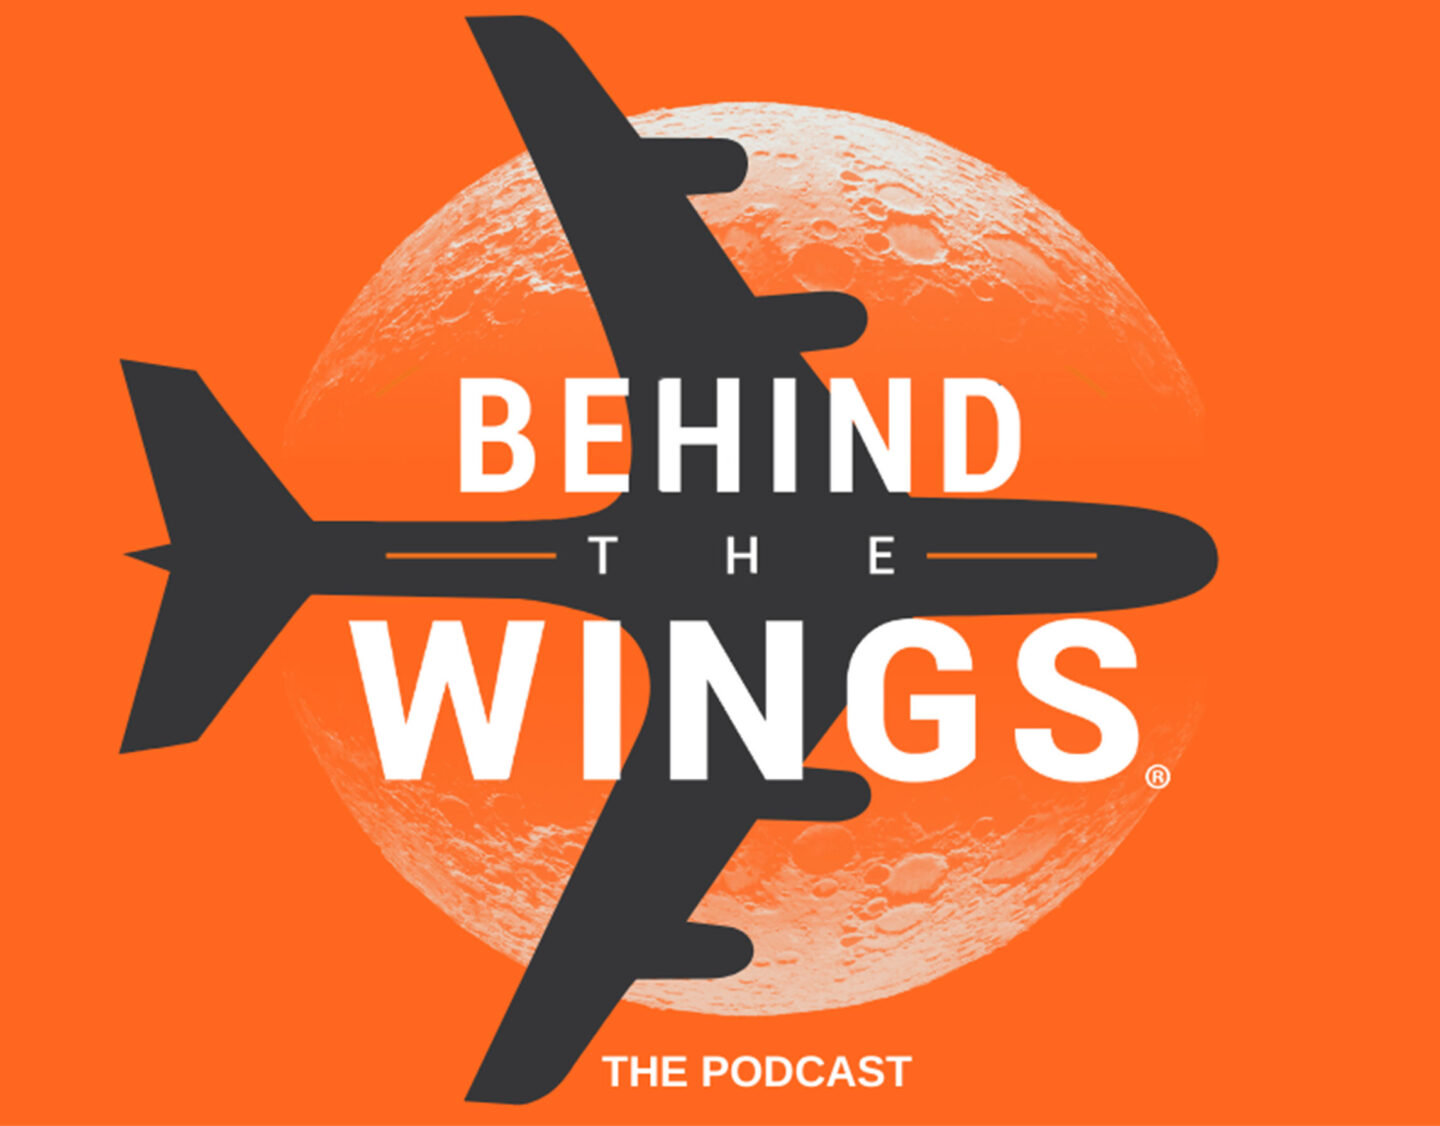 Behind the Wings Podcast Cover - Wings Museum